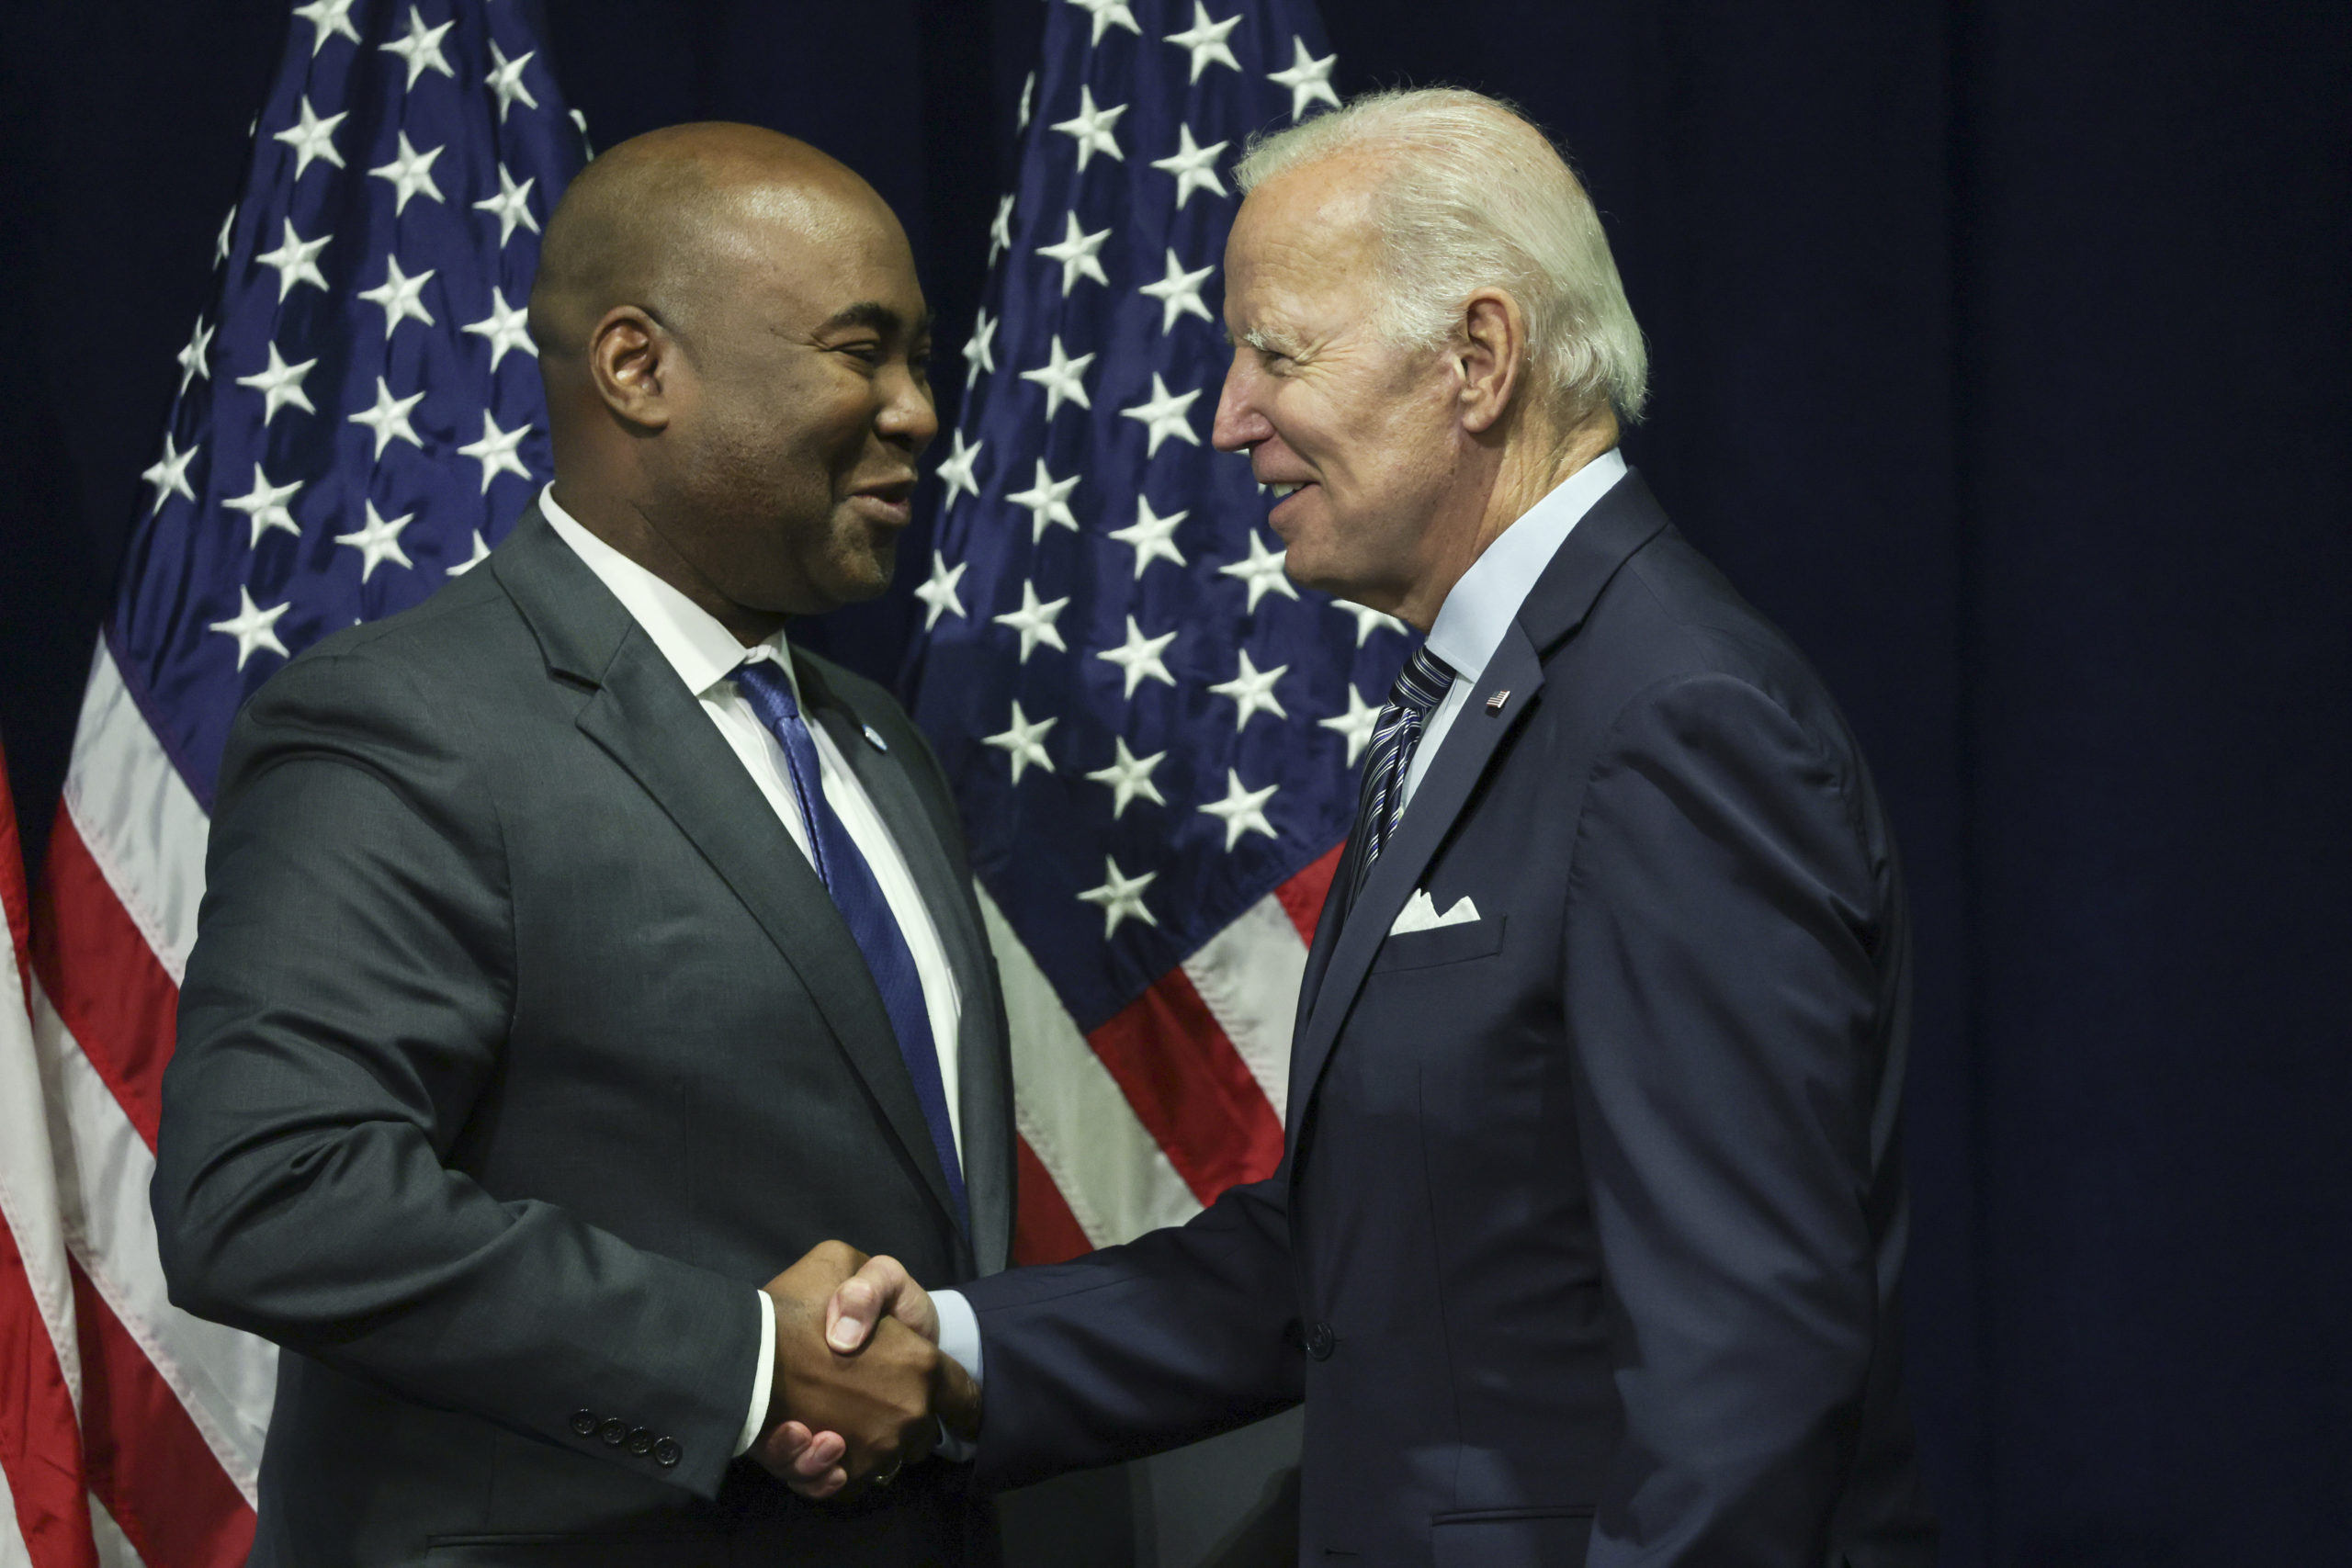 NATIONAL HARBOR, MARYLAND - SEPTEMBER 08: U.S. President Joe Biden (R) greets Jaime Harrison, chairman of the Democratic National Committee (DNC), at the organization's summer meeting at the Gaylord National Resort & Convention Center September 8, 2022 in National Harbor, Maryland. The president, ahead of the November midterm elections, sharpened his attack against former President Trump, calling his MAGA Republican supporters a threat to democracy. (Photo by Alex Wong/Getty Images)